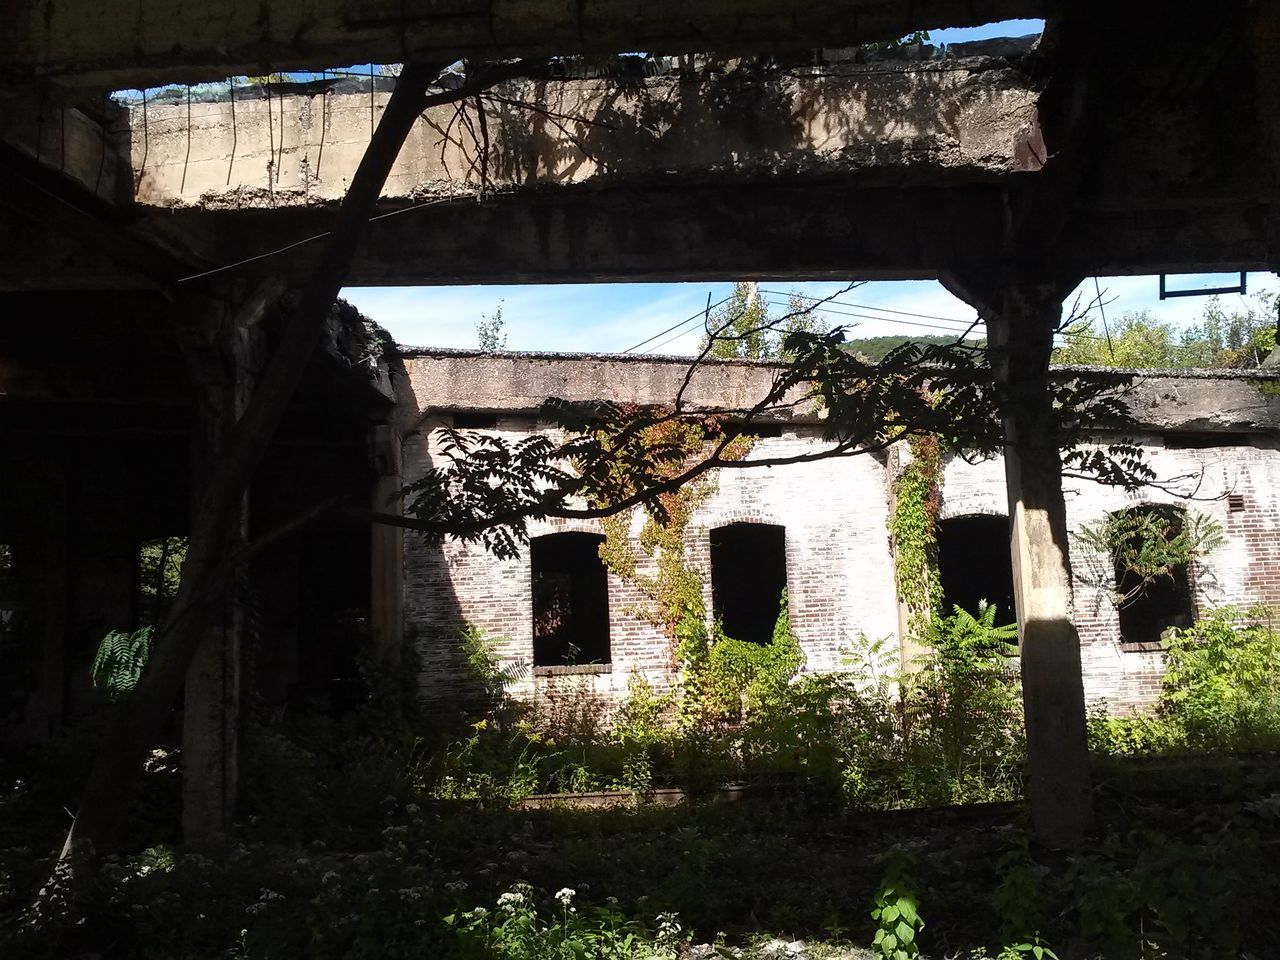 architecture, built structure, building exterior, abandoned, tree, house, old, obsolete, plant, damaged, run-down, deterioration, growth, window, residential structure, day, weathered, no people, residential building, wall - building feature